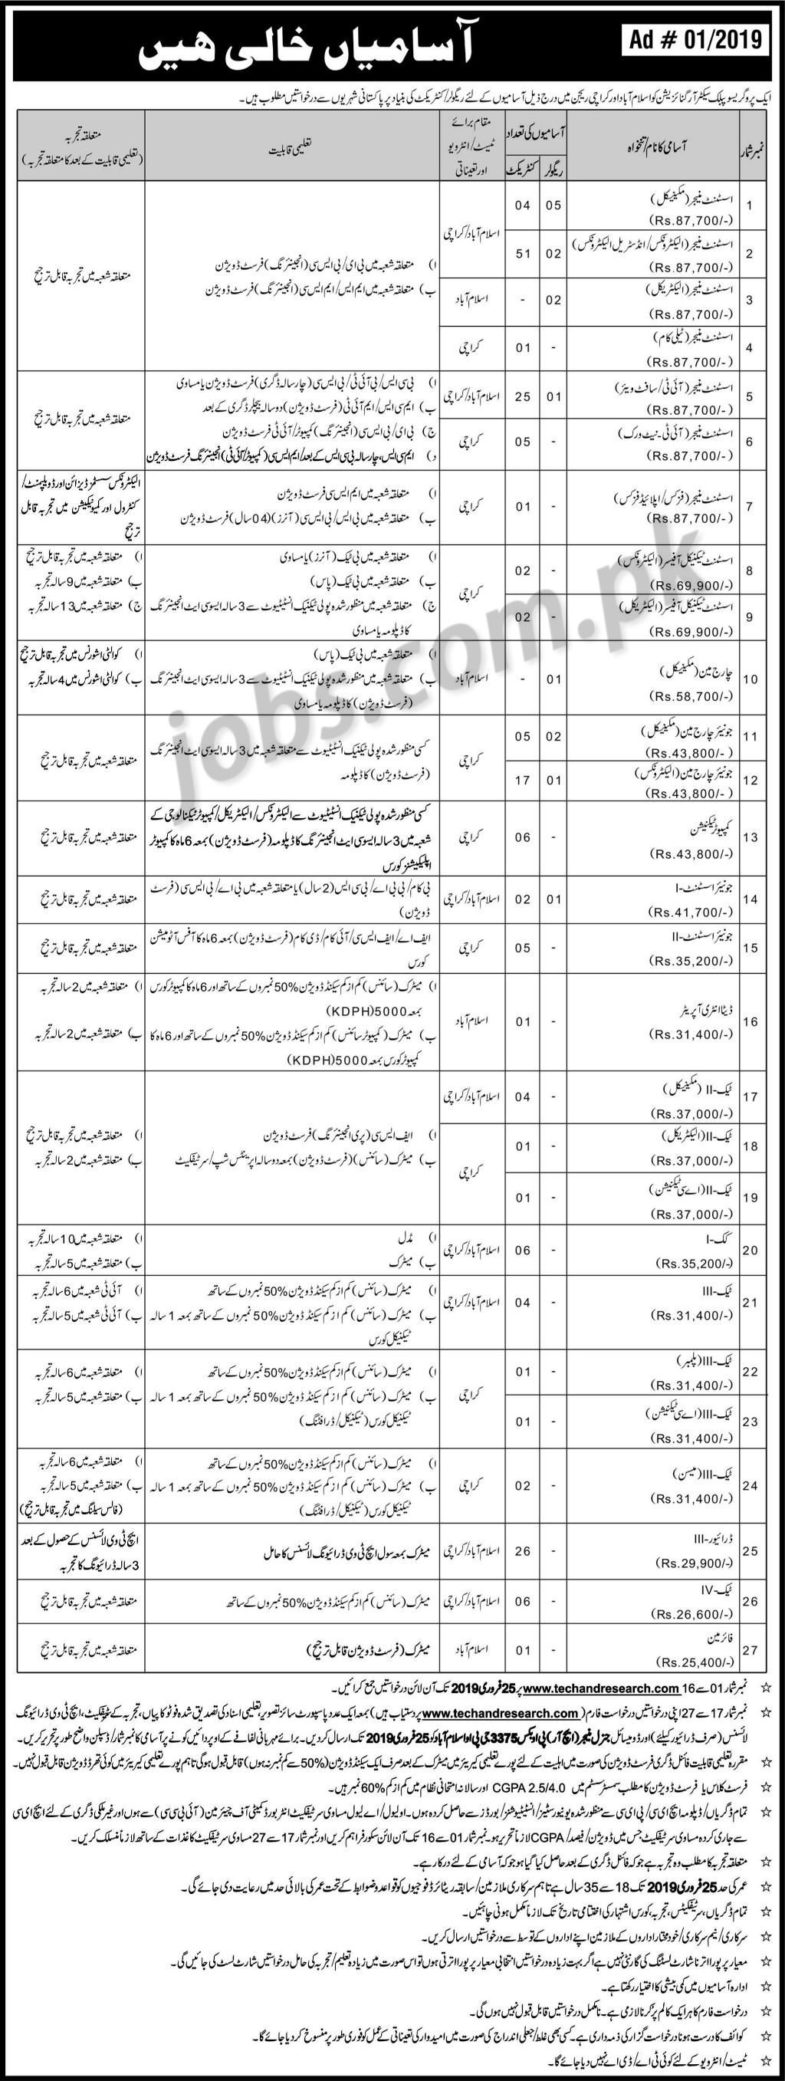 PO Box 3375 Jobs 2019 – Apply Online: Name of the Organization: PO Box 3375 Total No. of Vacancies: 195 Qualifications & Age Limit: Please see job notification below for relevant experience, qualification & age limit information. Job Location: Islamabad Last Date To Apply: 25th February 2019